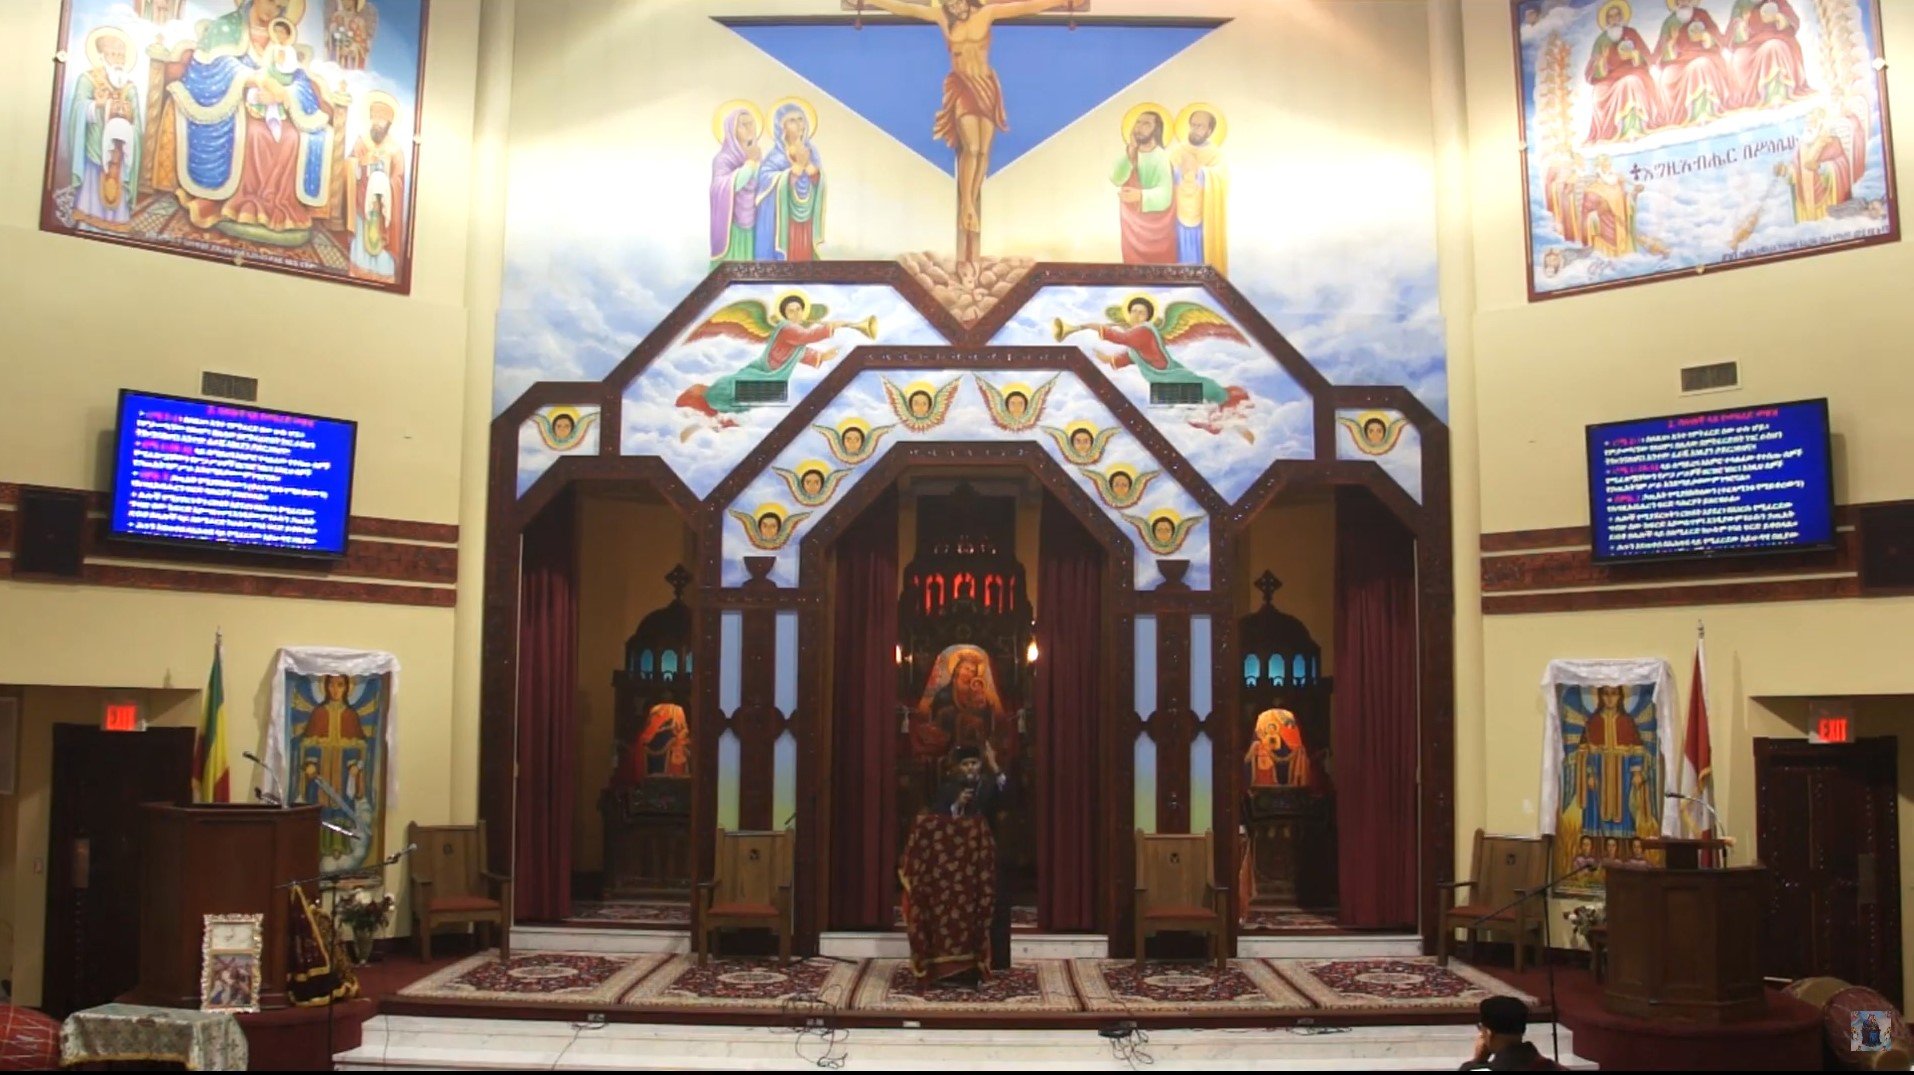 Bible Study @ Ethiopian Orthodox Tewahedo Church - Eastern Canada Diocese - Menbere Berhan Kidest Mariam (St. Mary) Cathedral